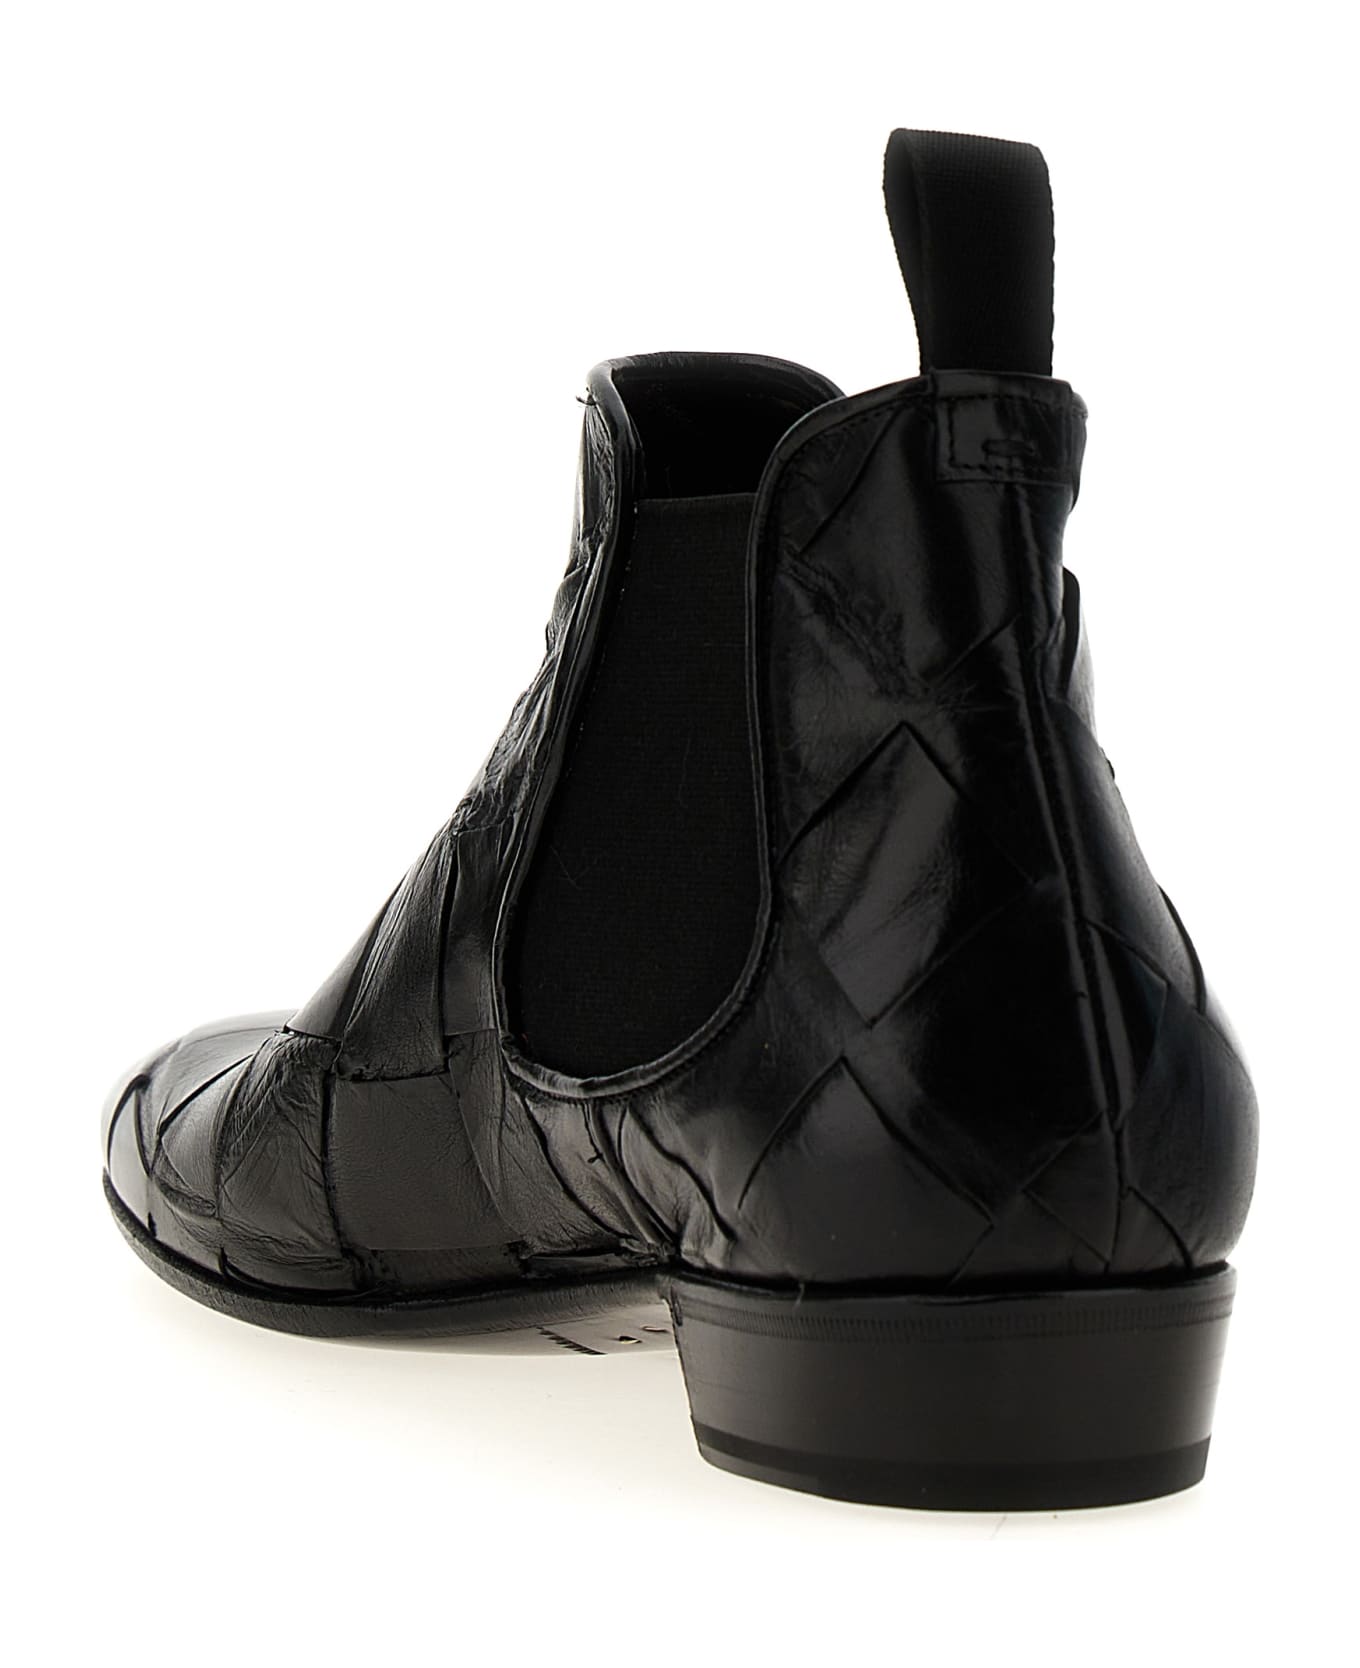 Lidfort Braided Leather Ankle Boots - Black  